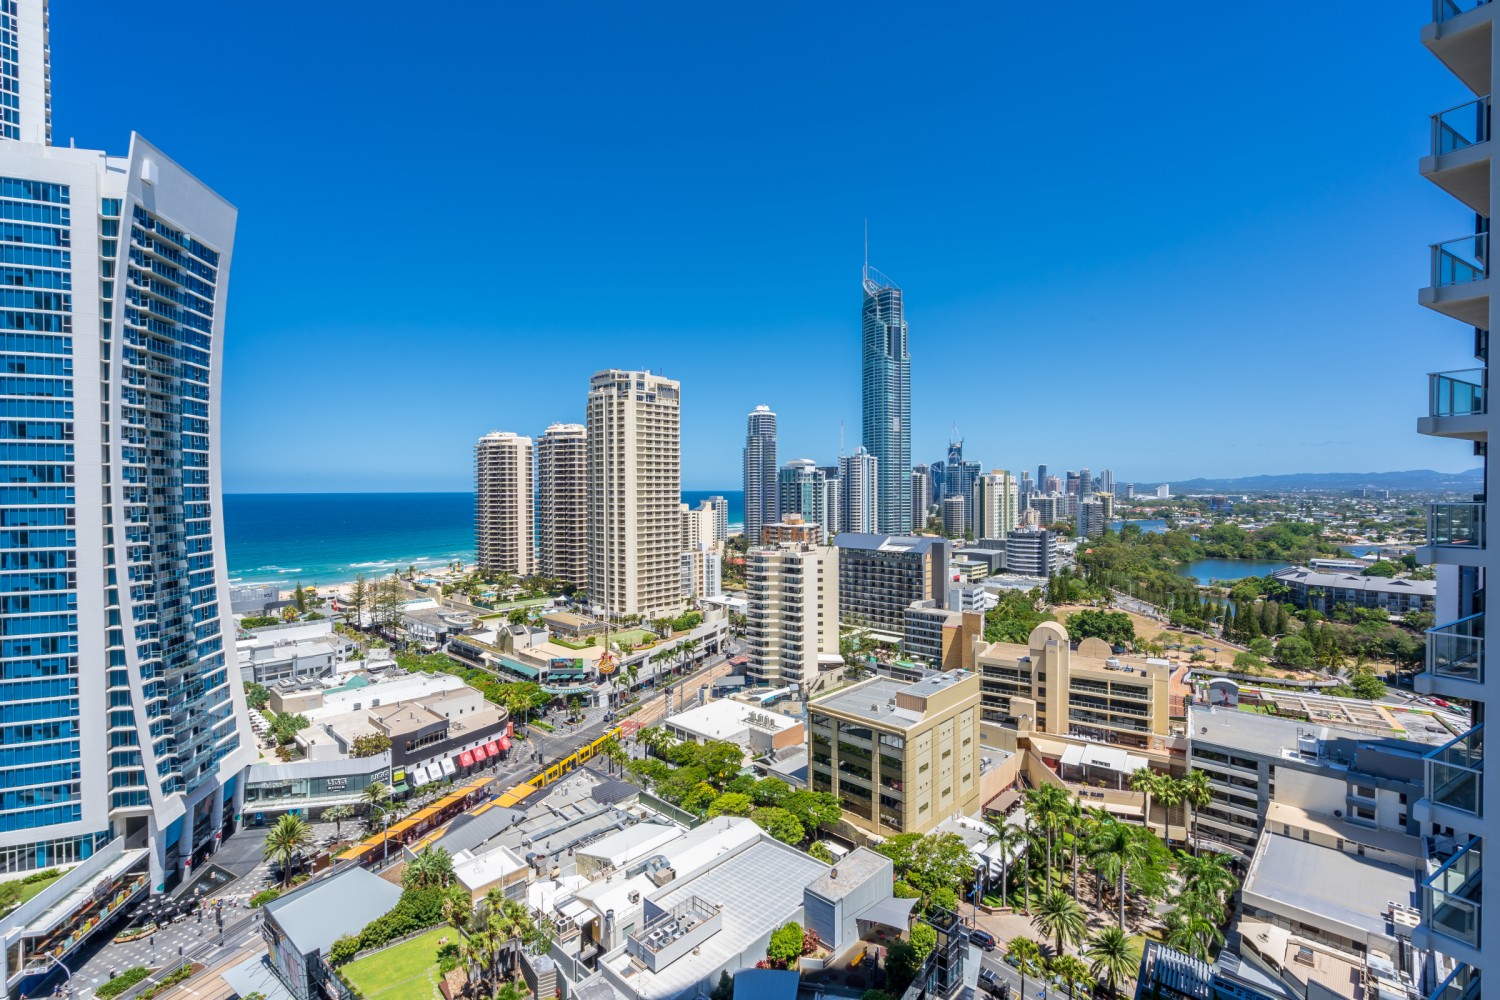 Surfers Paradise views from Balcony